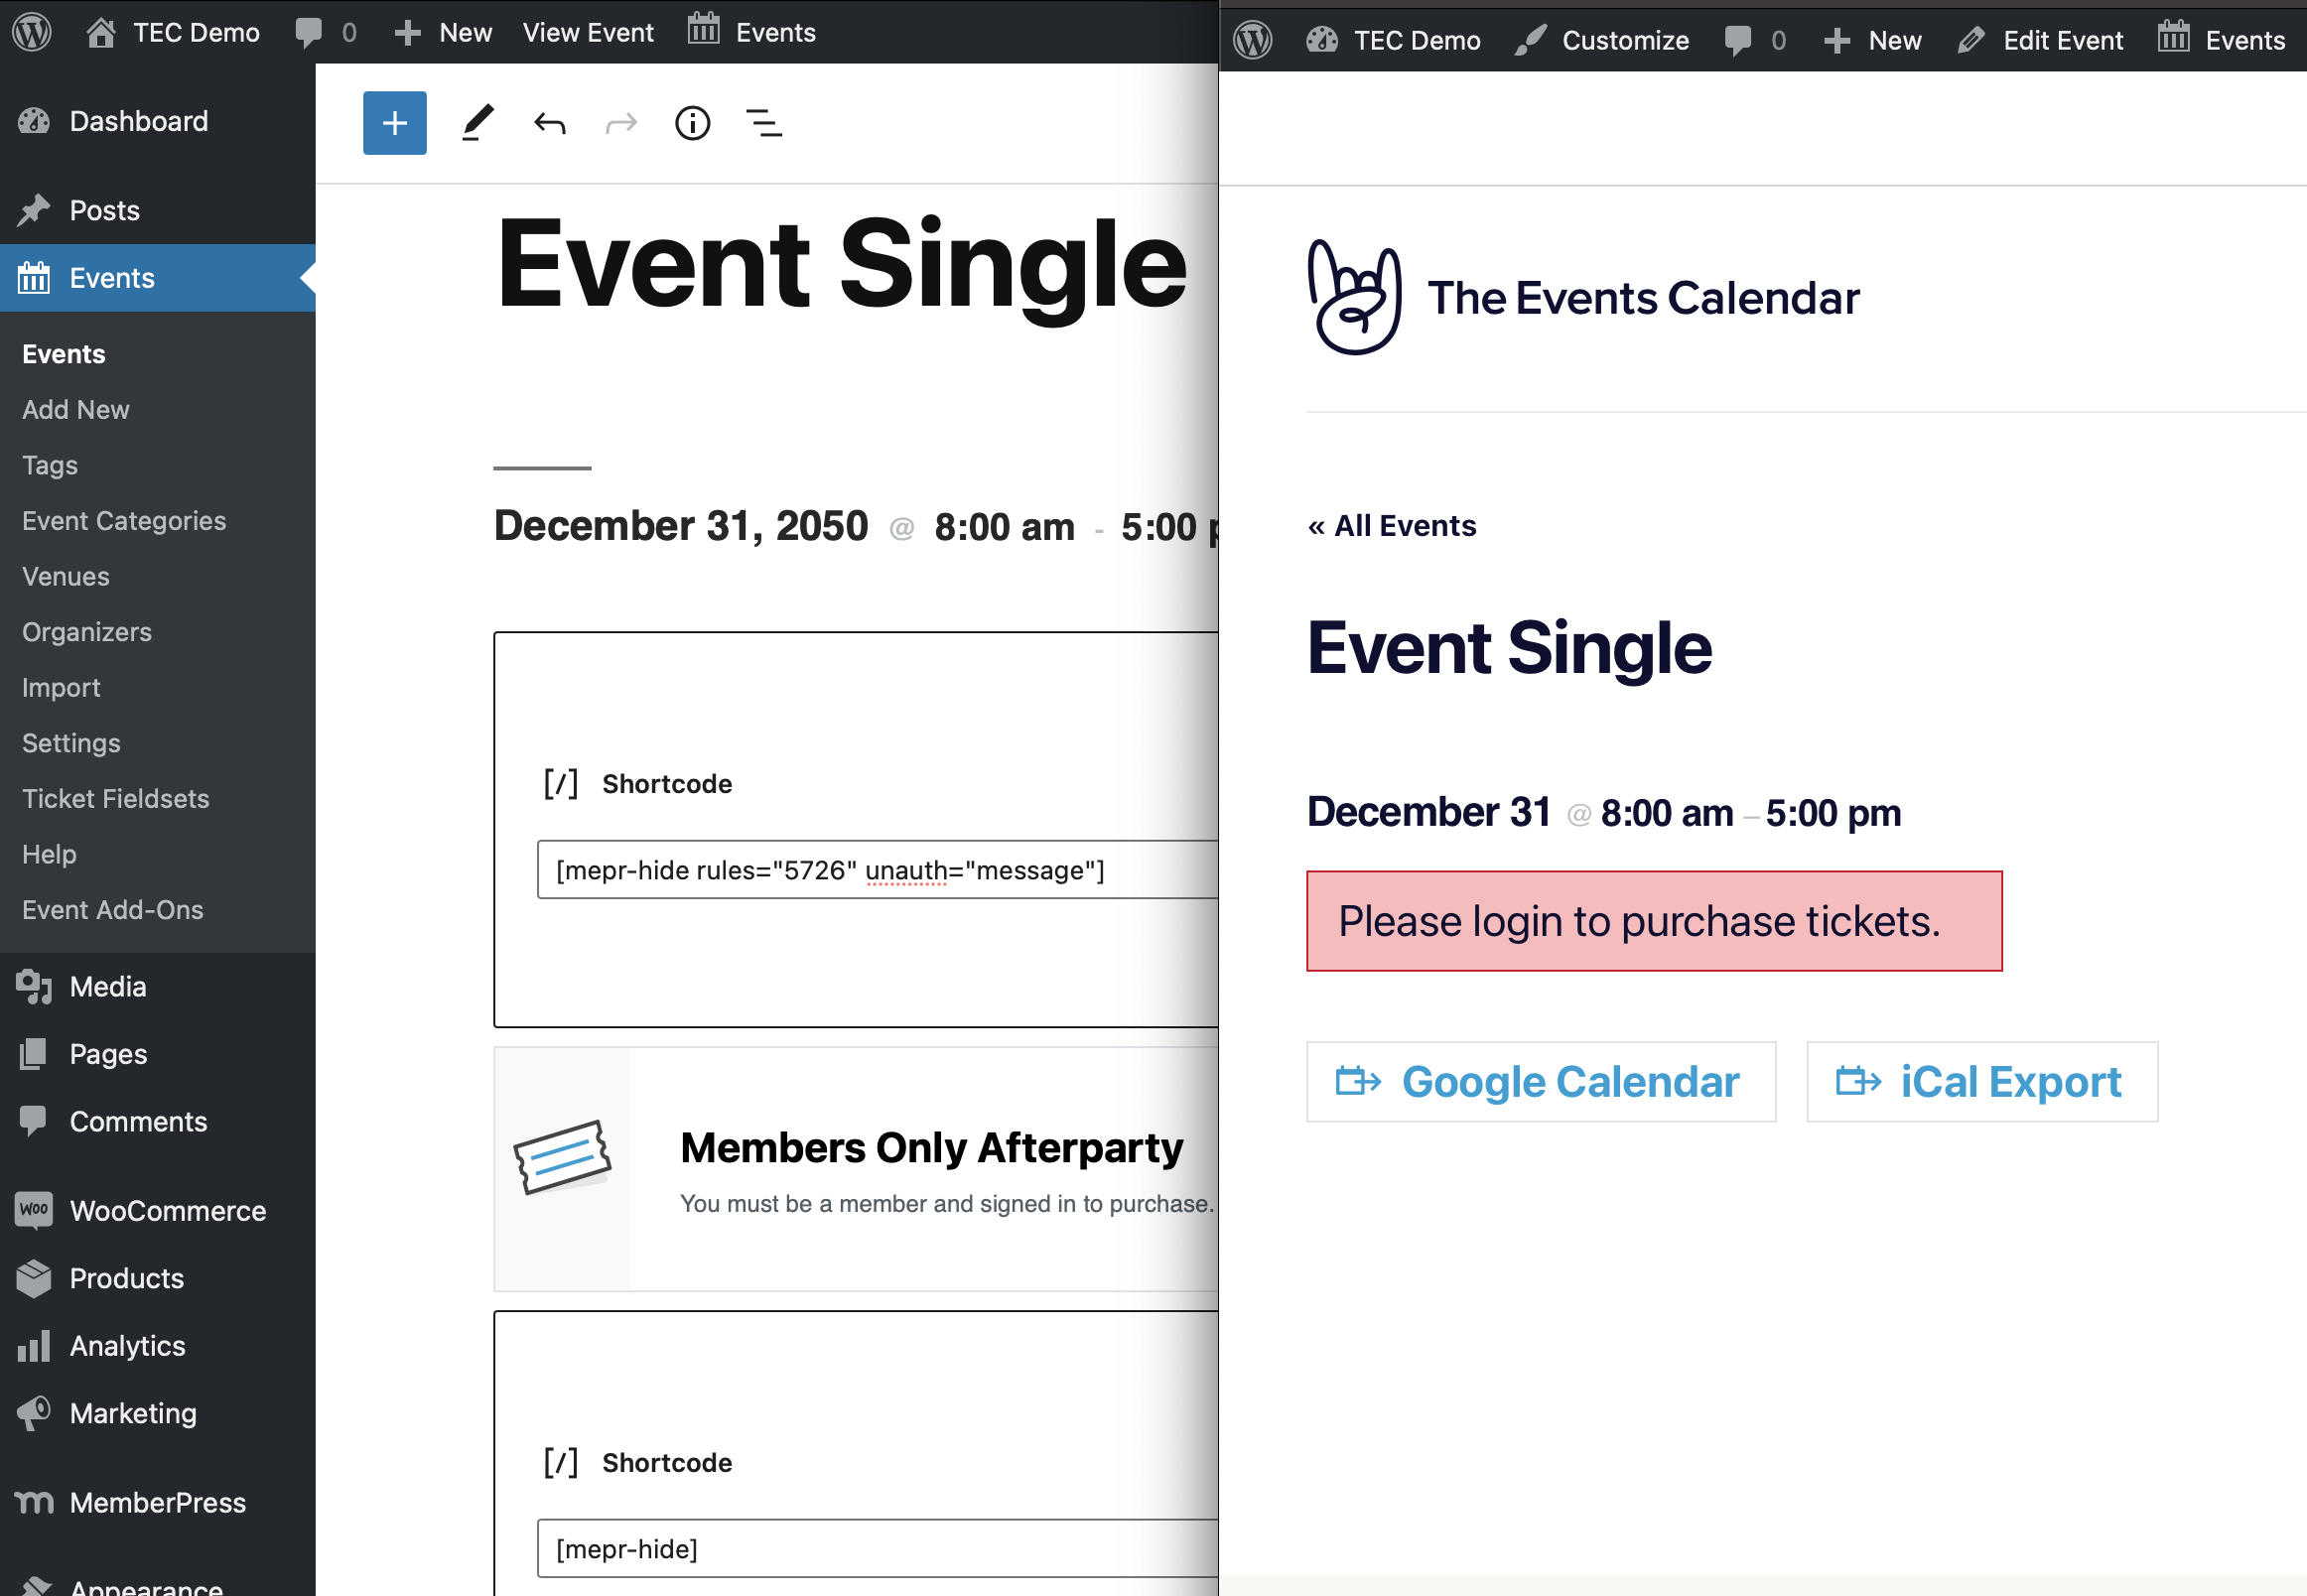 Frontend and backend views of the event page